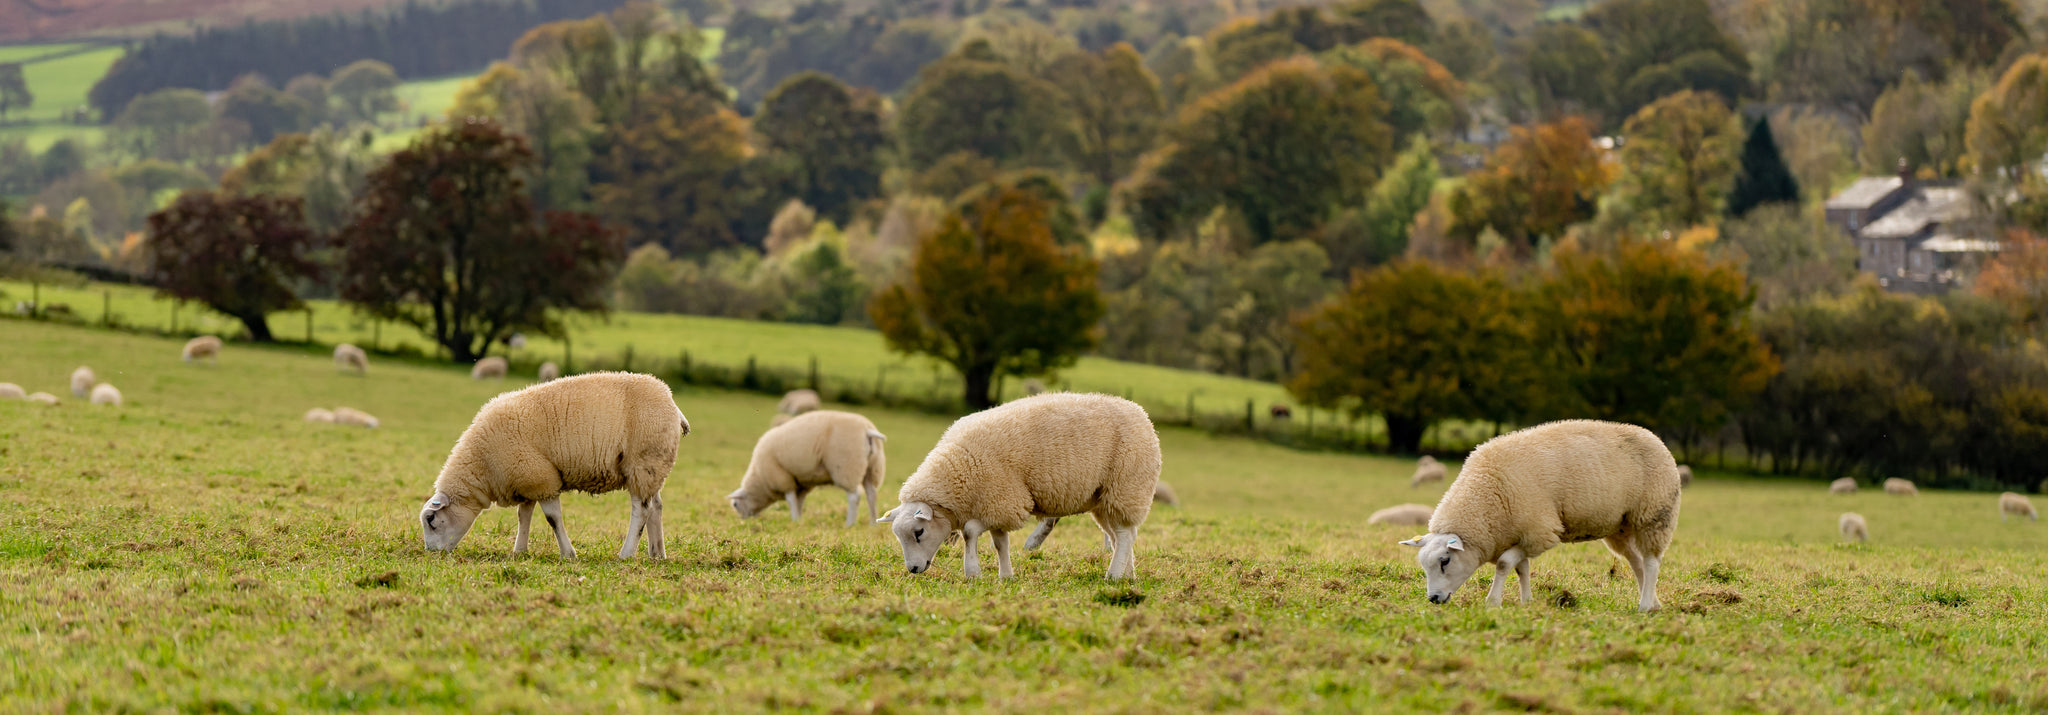 Sheep grazing on the countryside